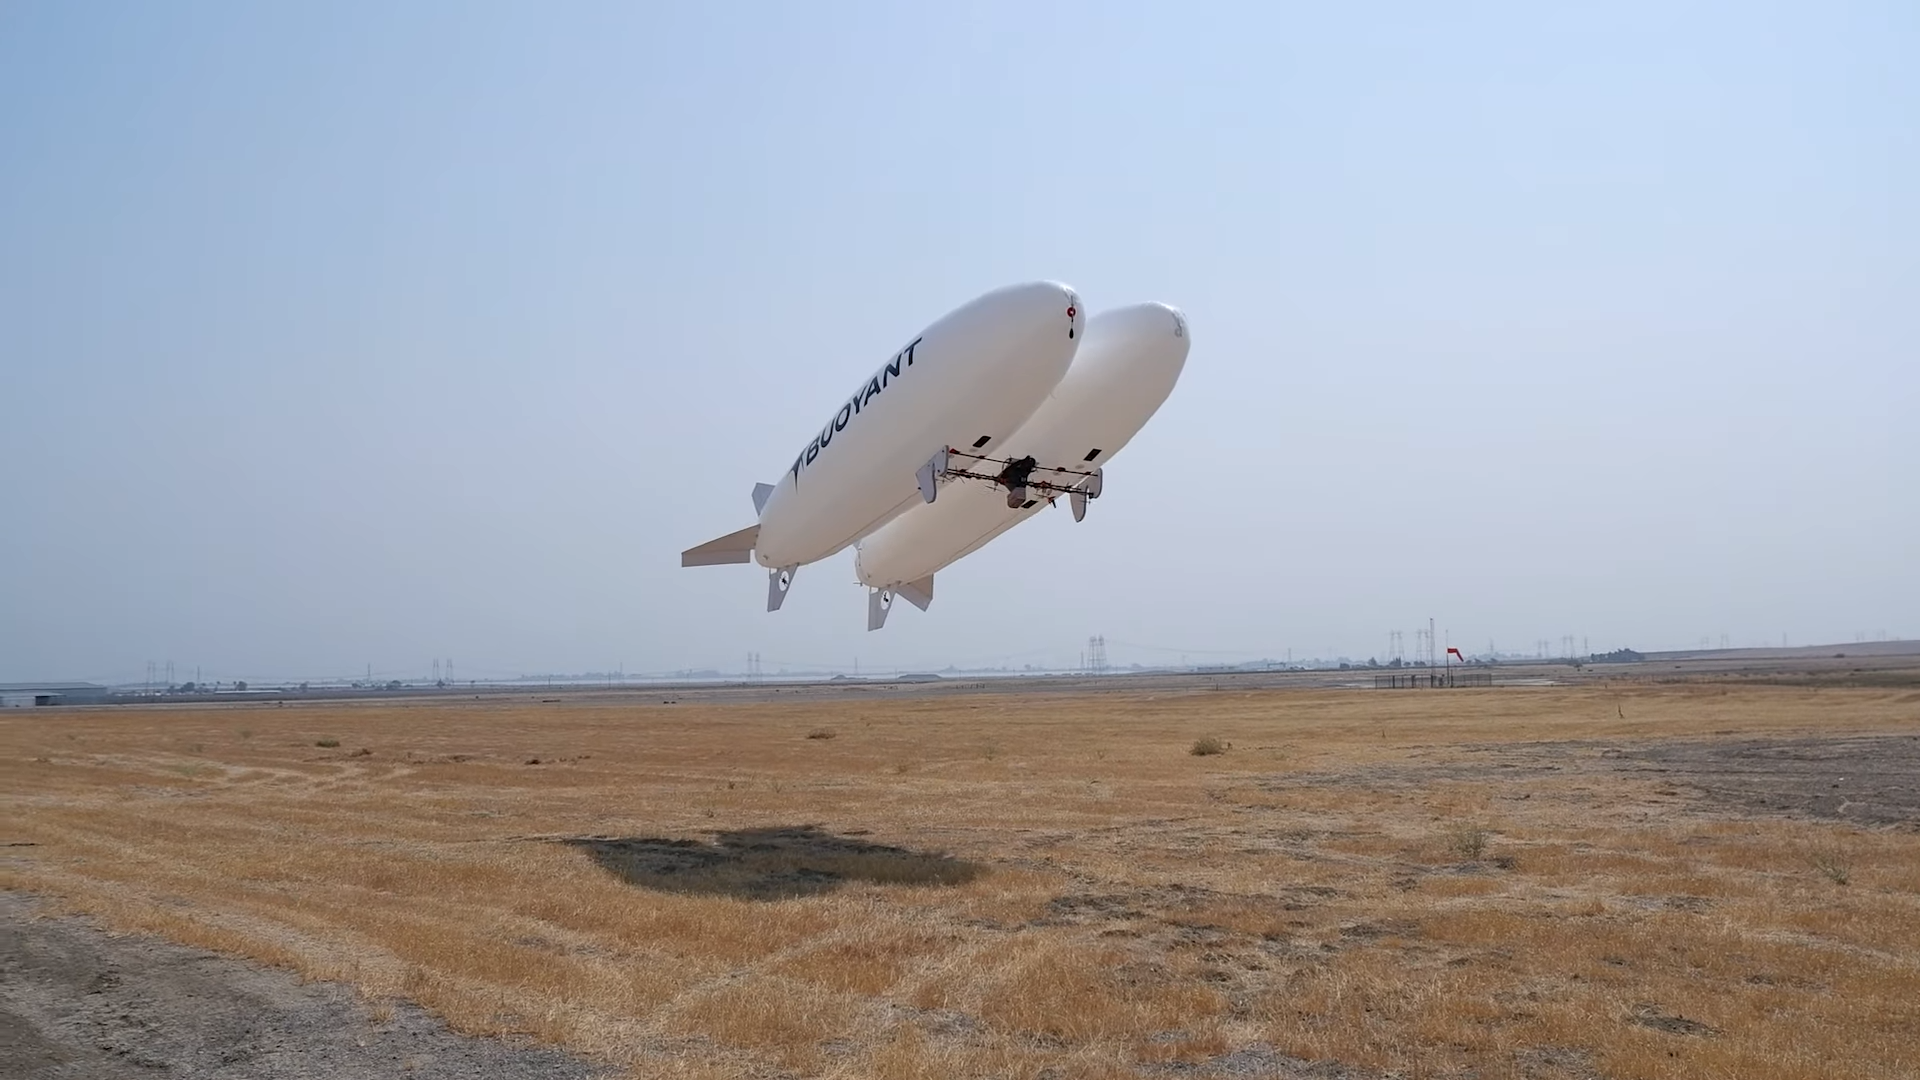 Will Airships Have A Place In The Future Of Aviation?